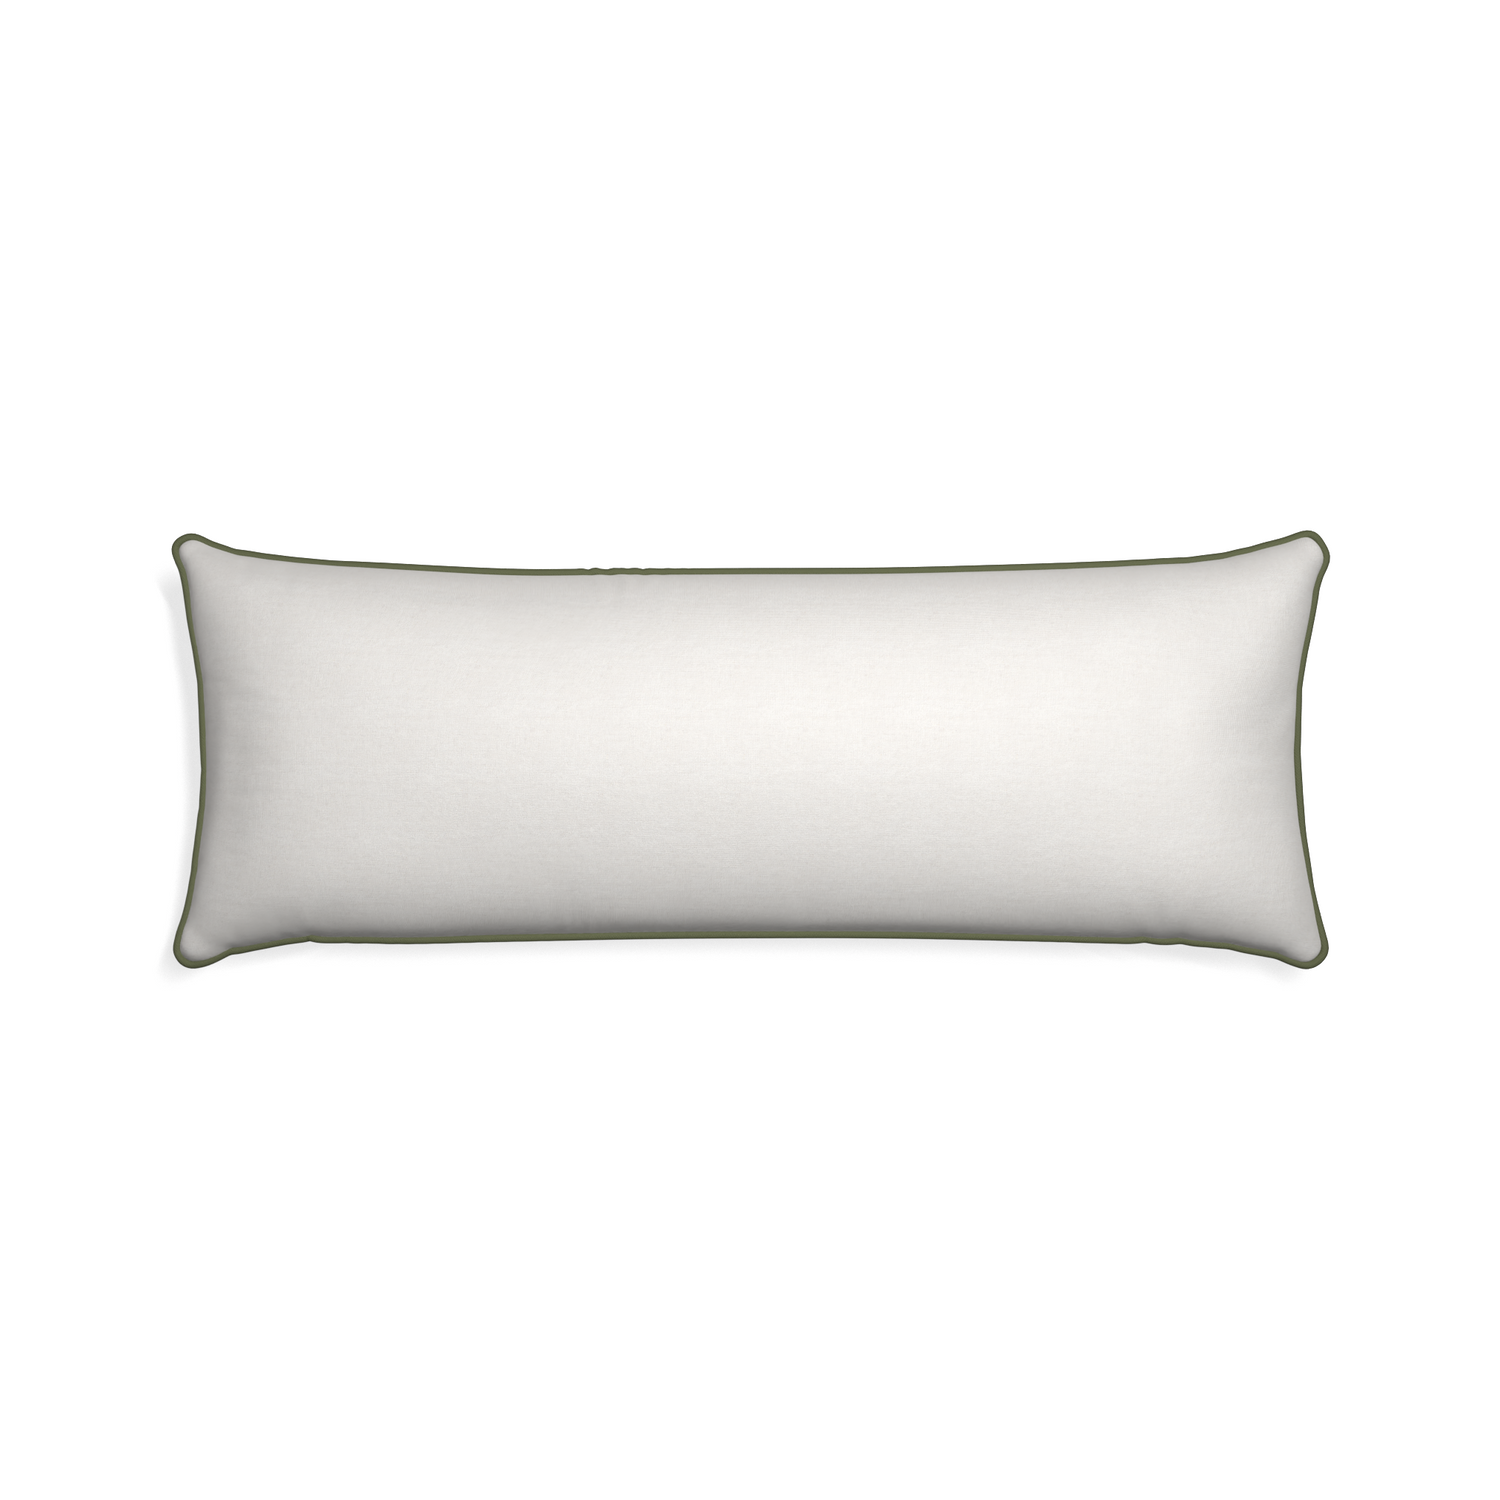 Xl-lumbar flour custom pillow with f piping on white background